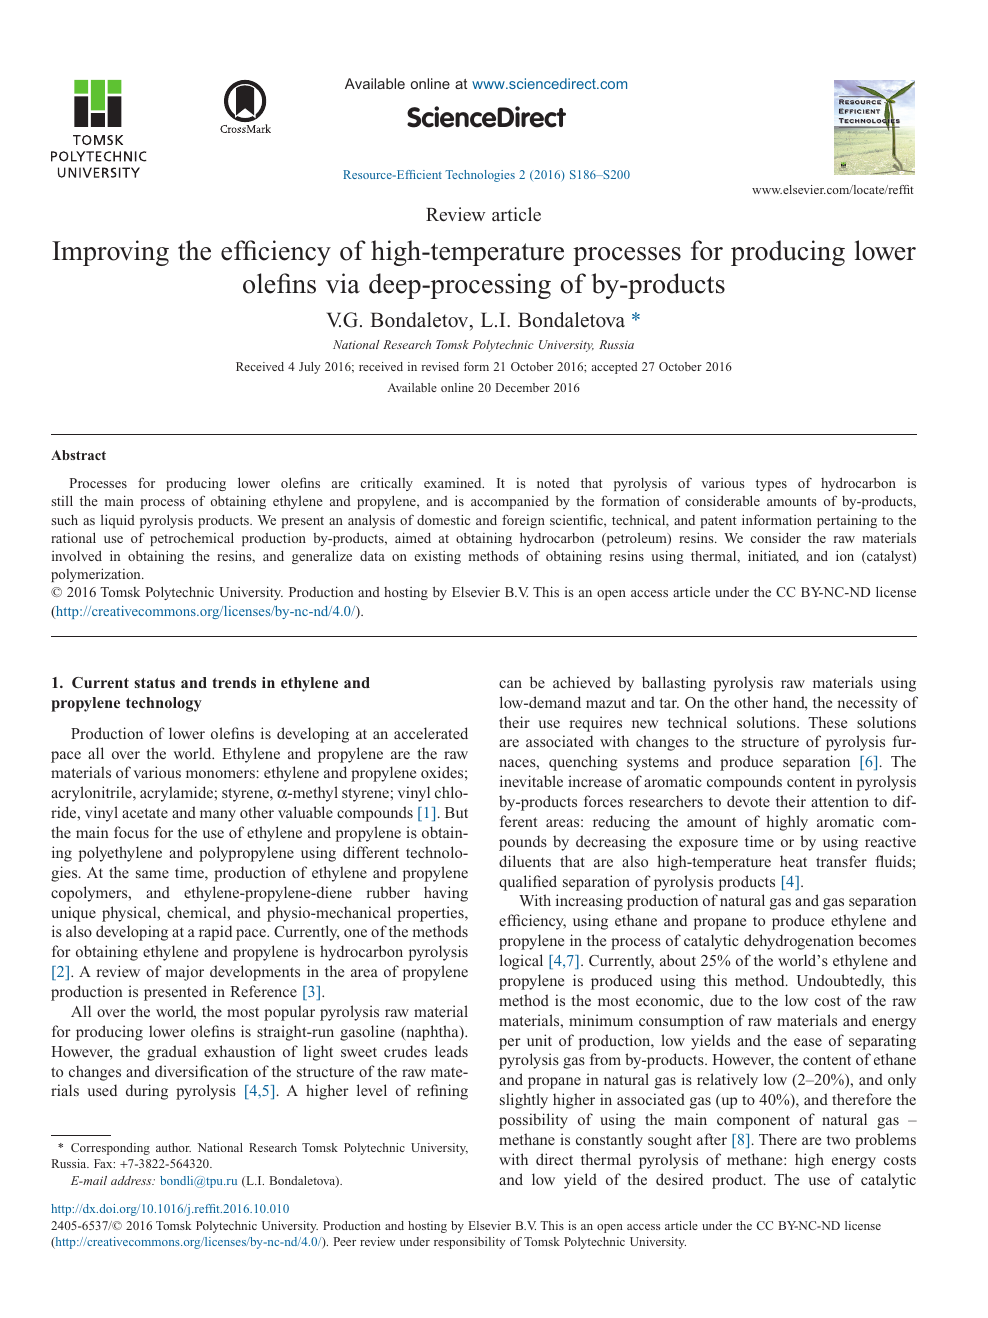 Improving The Efficiency Of High Temperature Processes For Producing Lower Olefins Via Deep Processing Of By Products Topic Of Research Paper In Chemical Sciences Download Scholarly Article Pdf And Read For Free On Cyberleninka